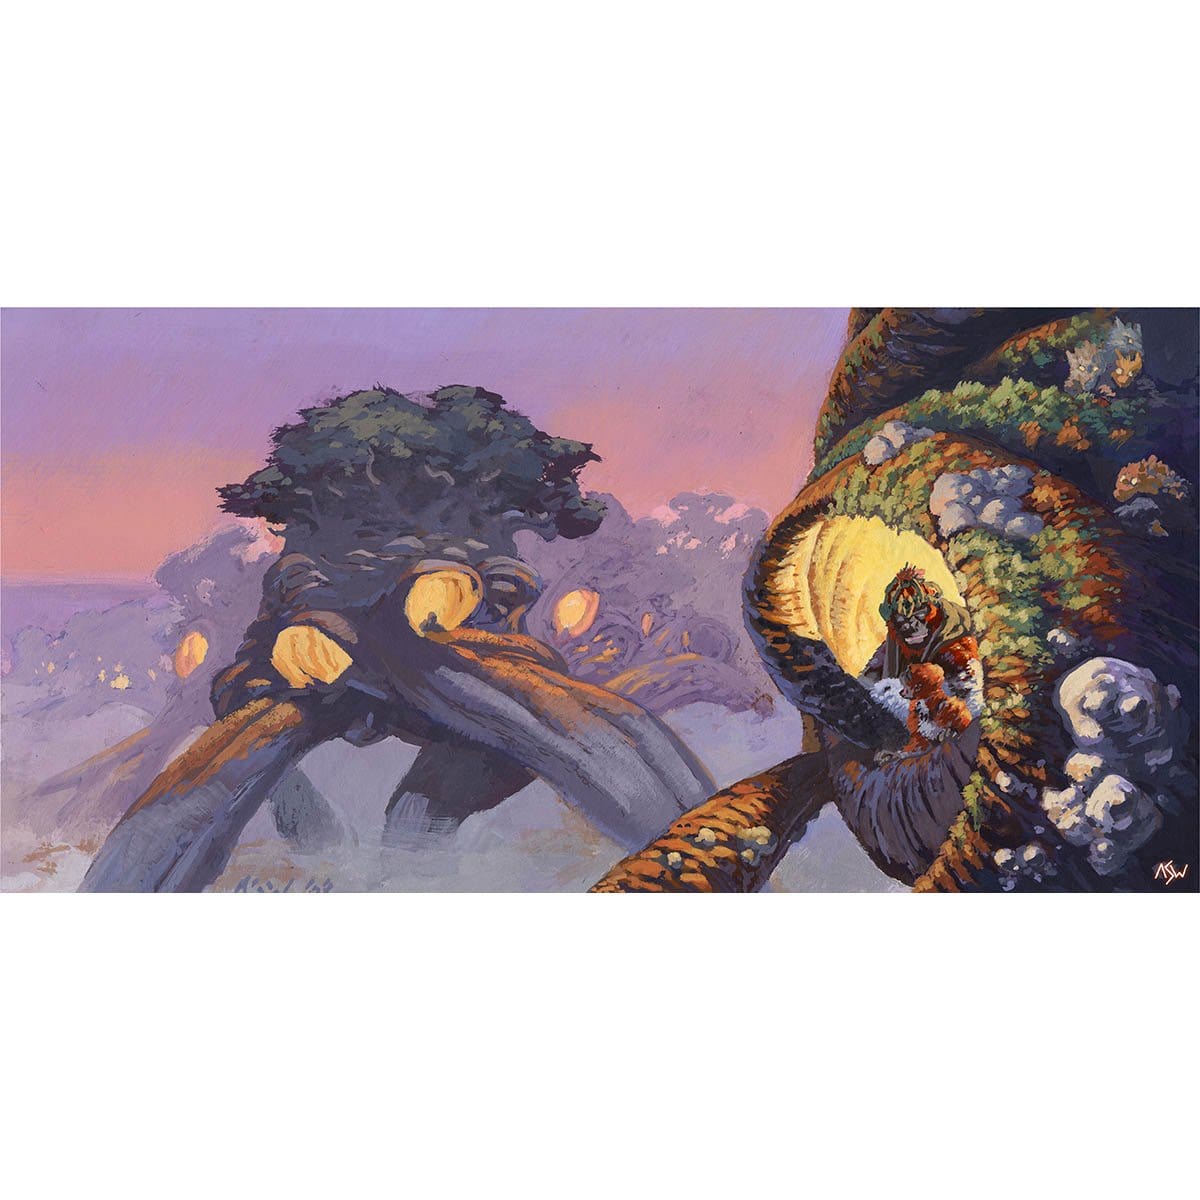 Treetop Village Print - Print - Original Magic Art - Accessories for Magic the Gathering and other card games